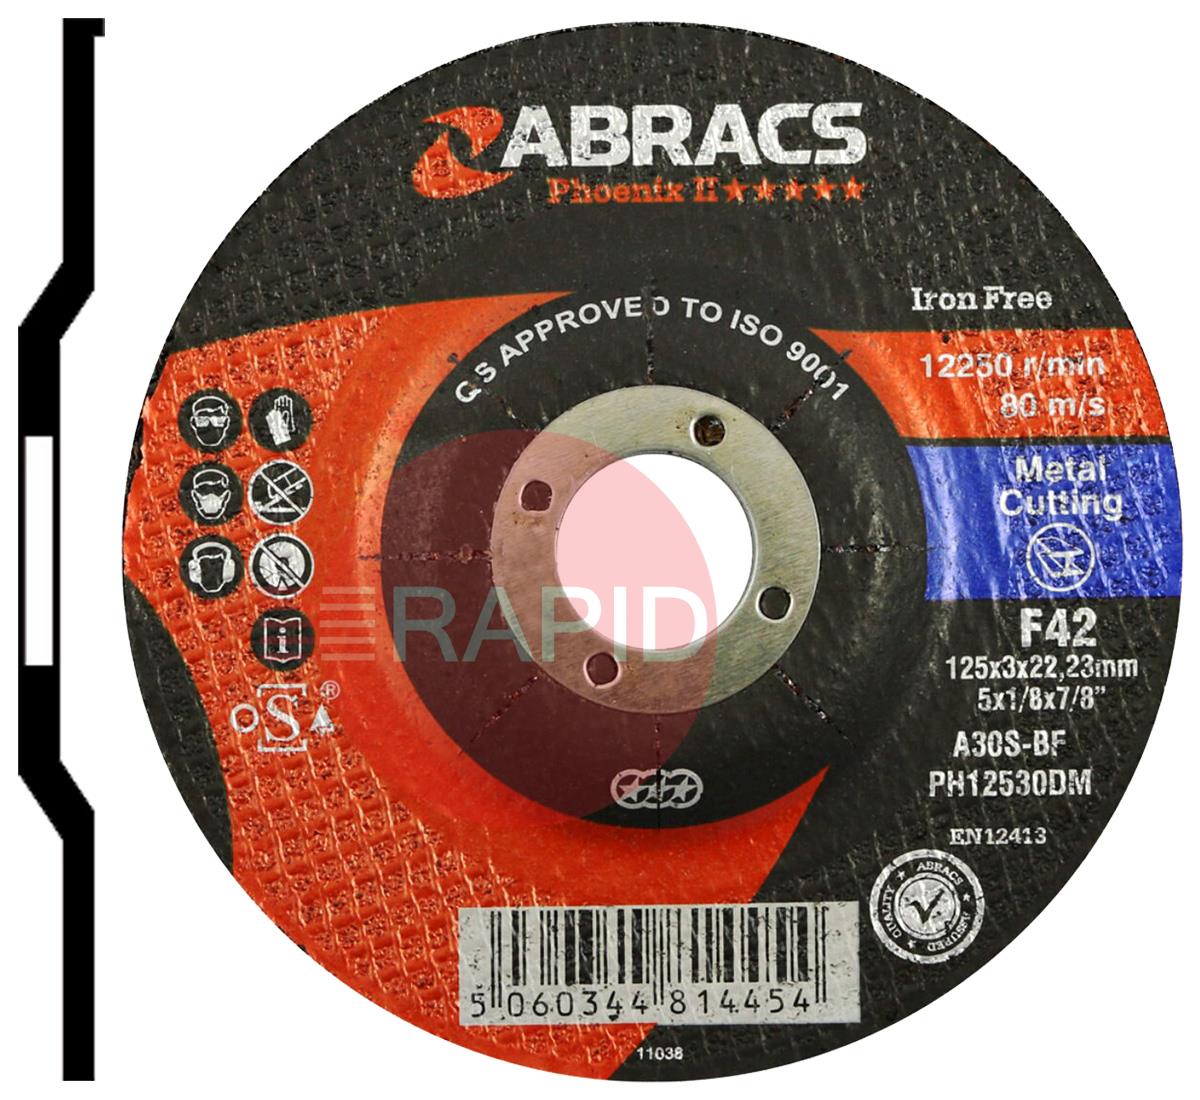 PH12530DM  Abracs Phoenix II 125mm (5) Depressed Centre Cutting Disc 3mm Thick. Grade A30S-BF for Steel